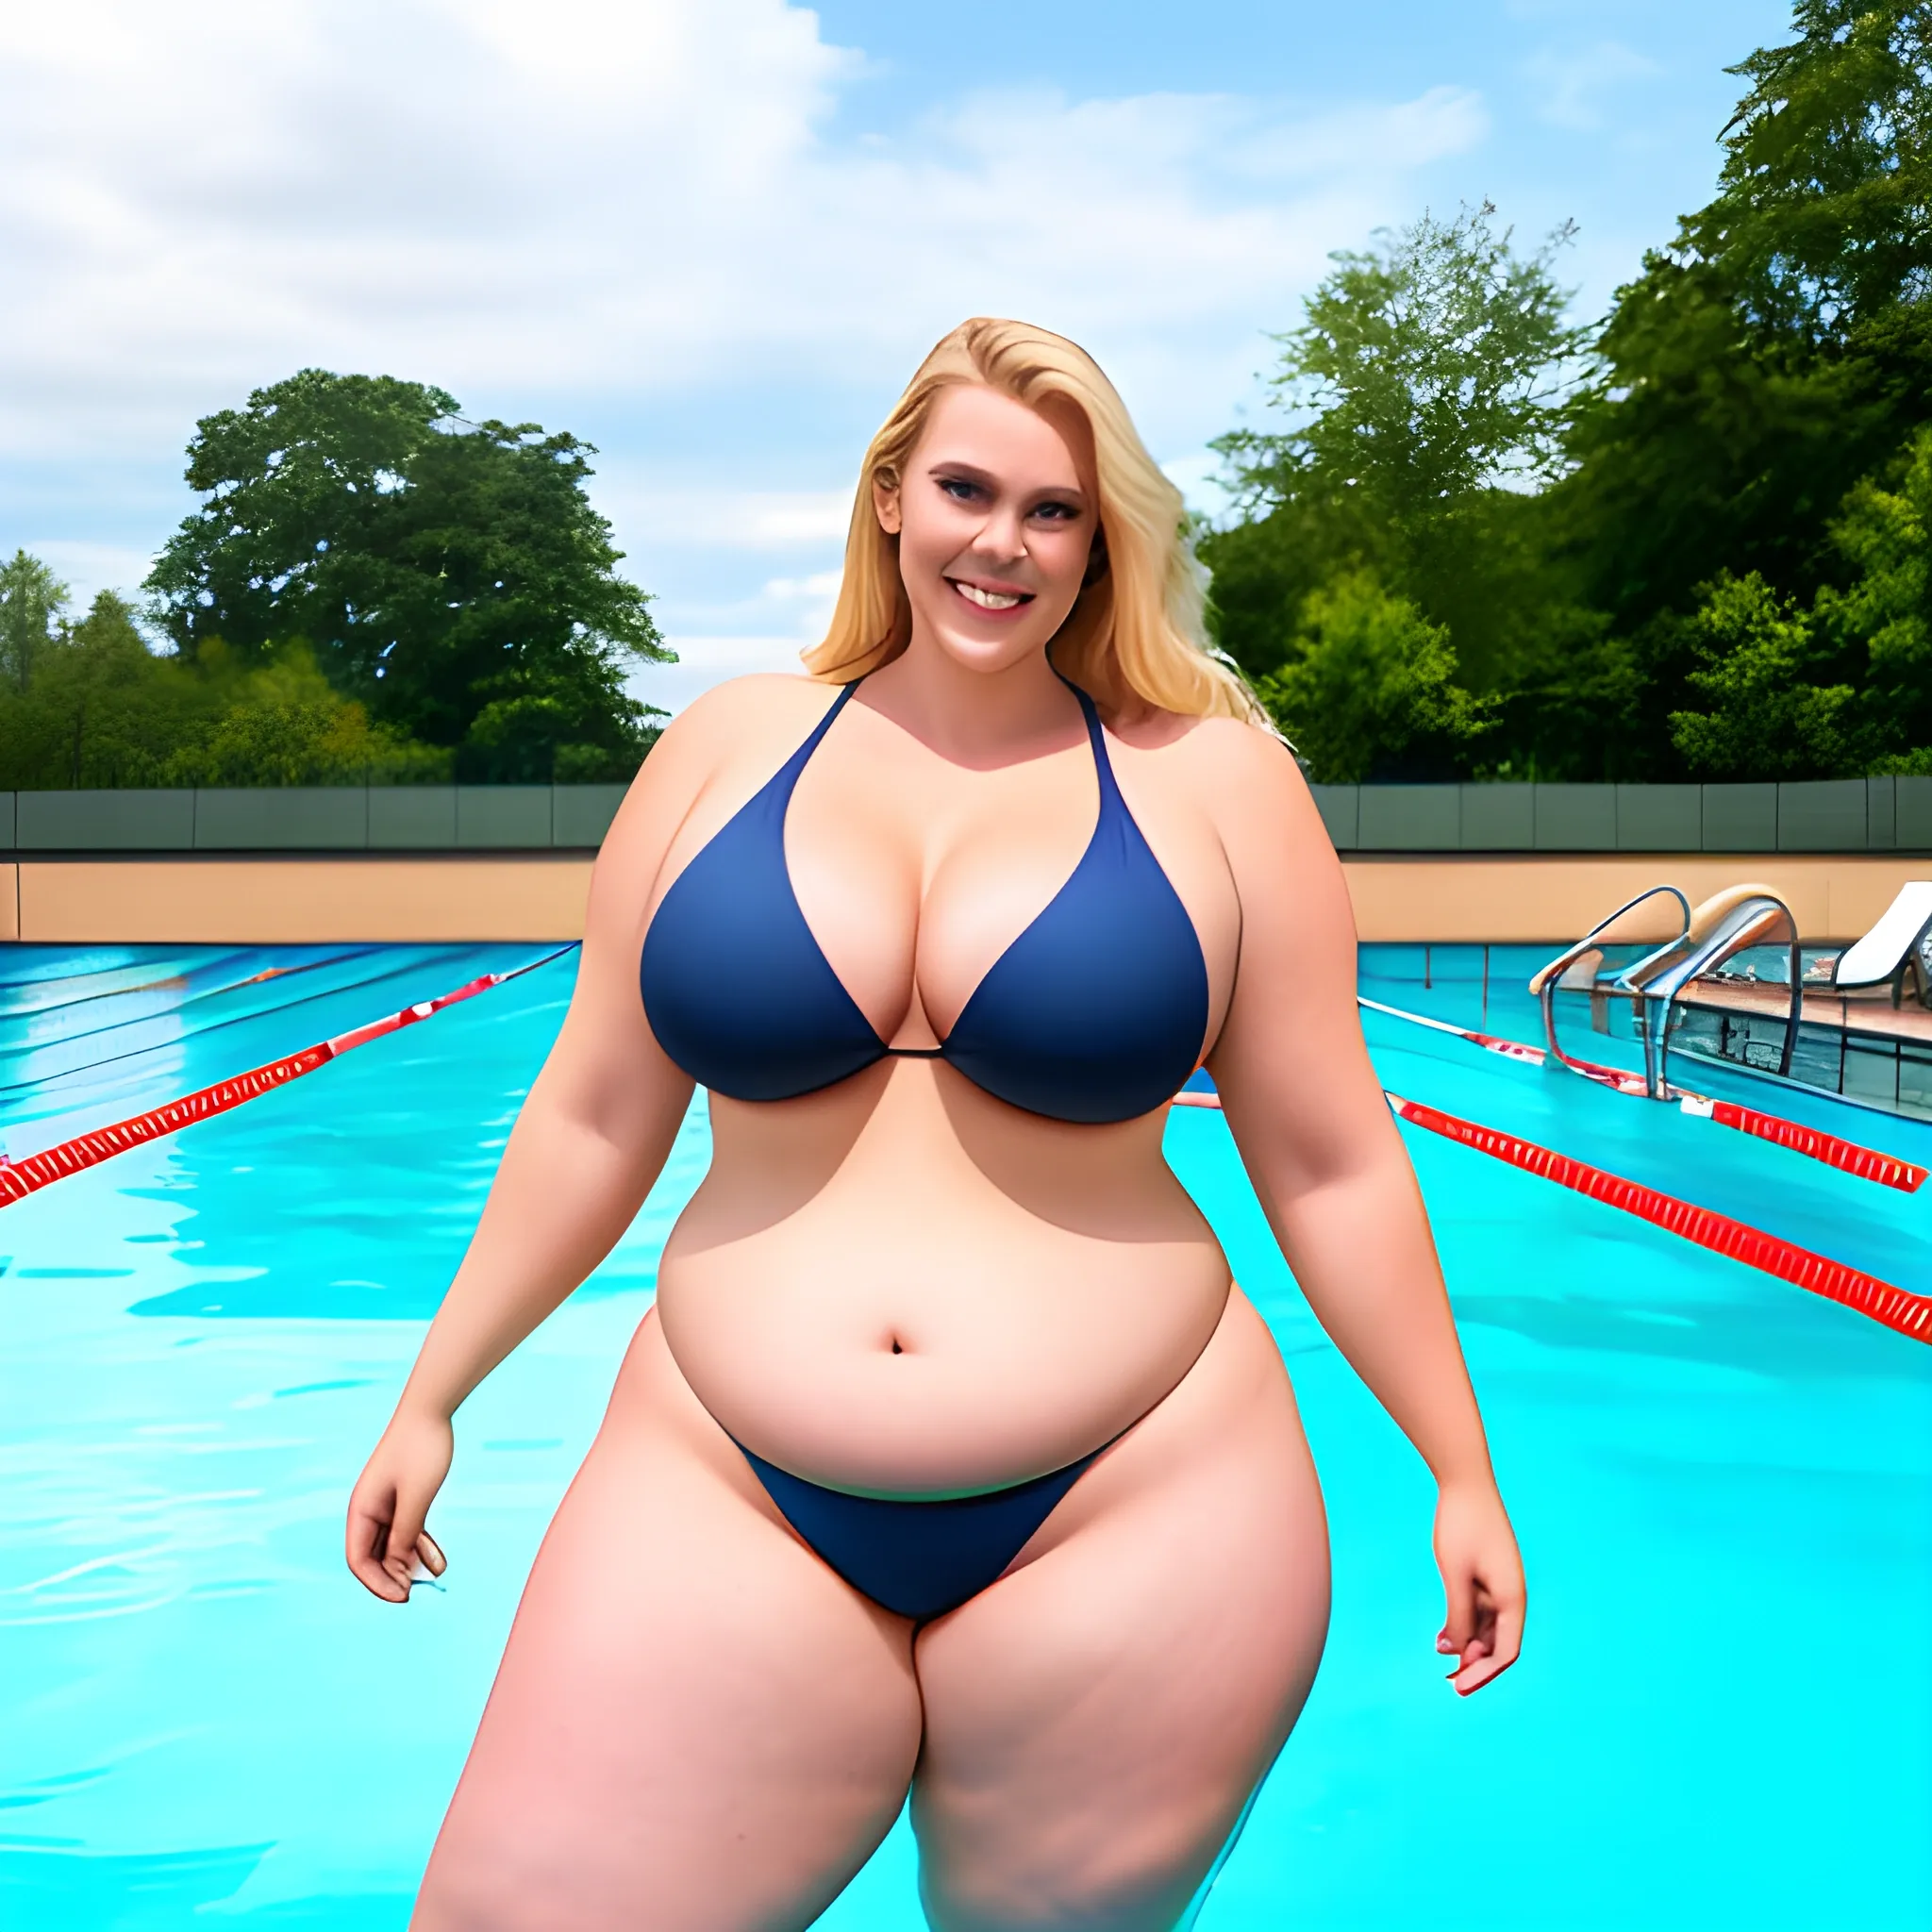 huge tall plus size, not curvy, muscular blonde young girl with